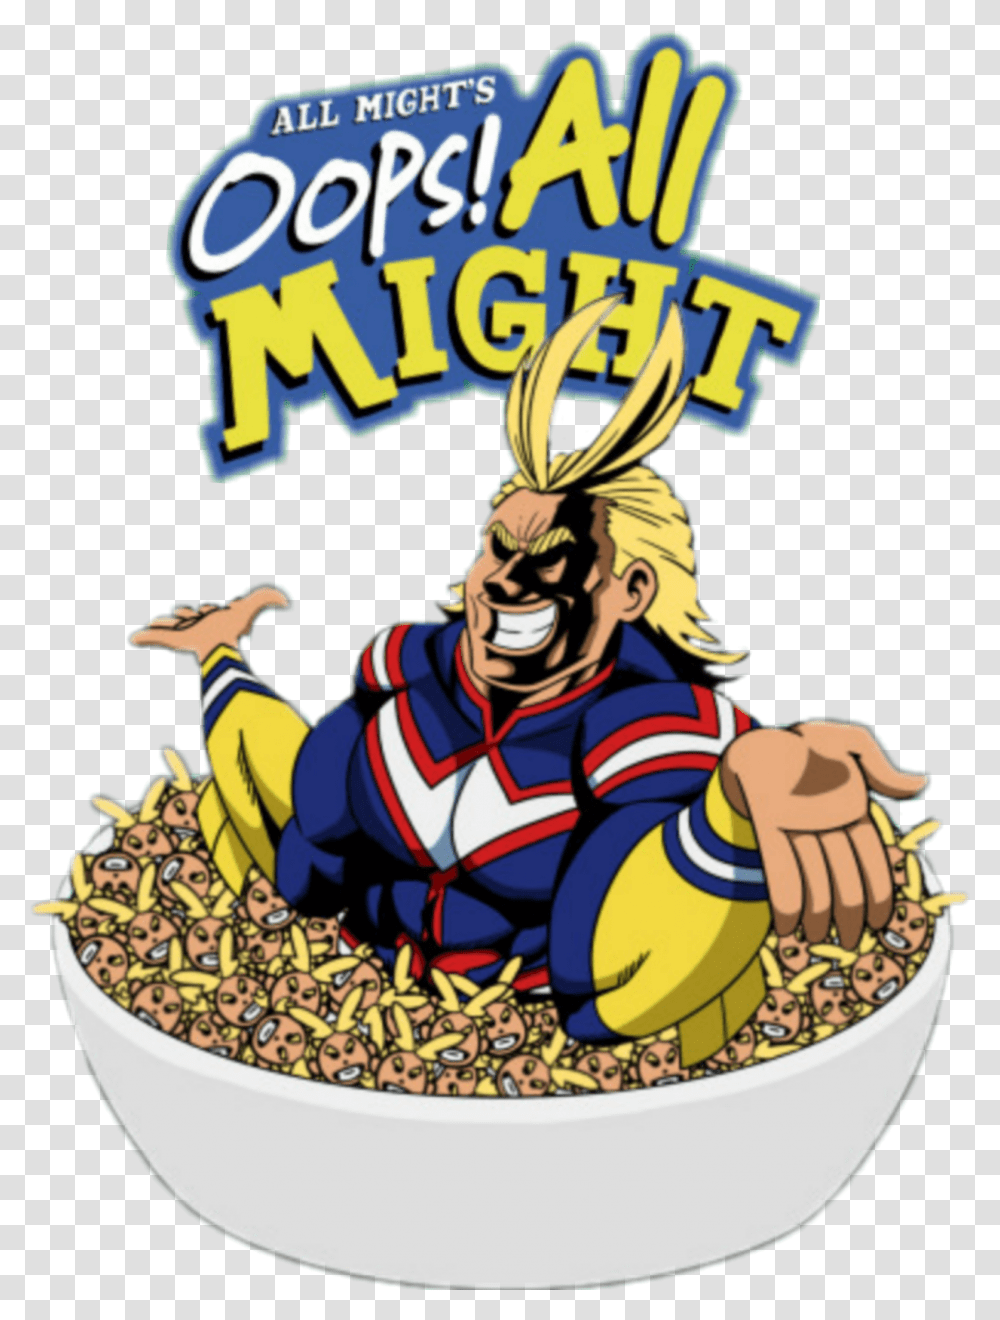 Oops Allmight Cereal Freetoedit Bnha Mha, Person, Book, Bowl, Comics Transparent Png